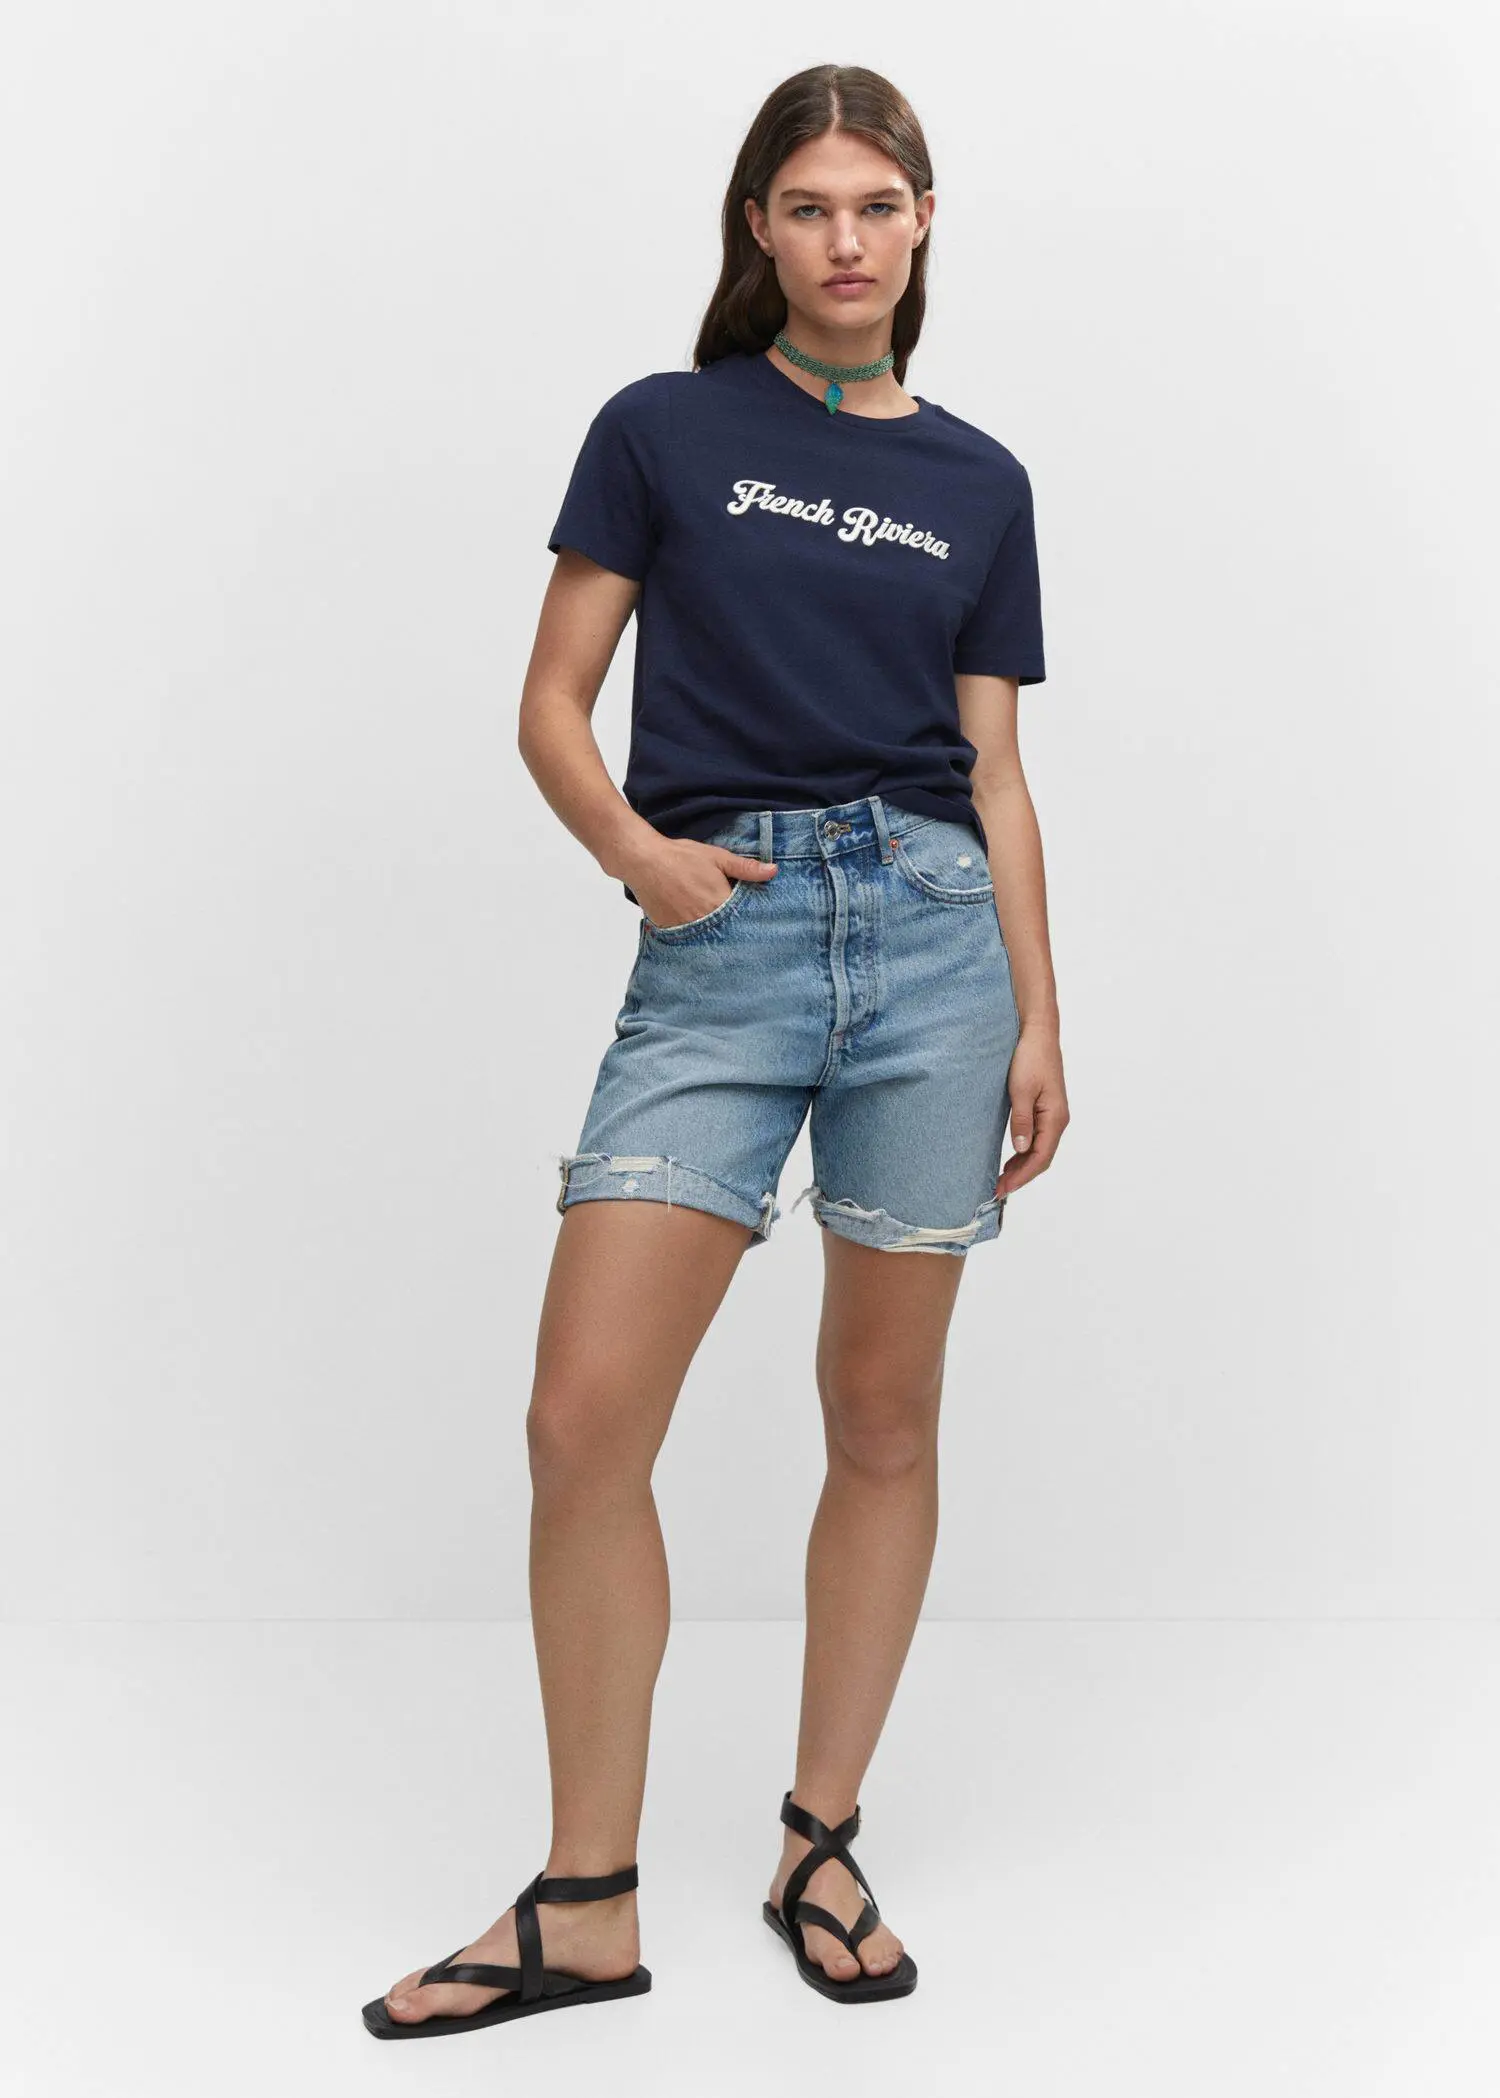 Mango Embroidered message T-shirt. a woman wearing a t-shirt and denim shorts. 